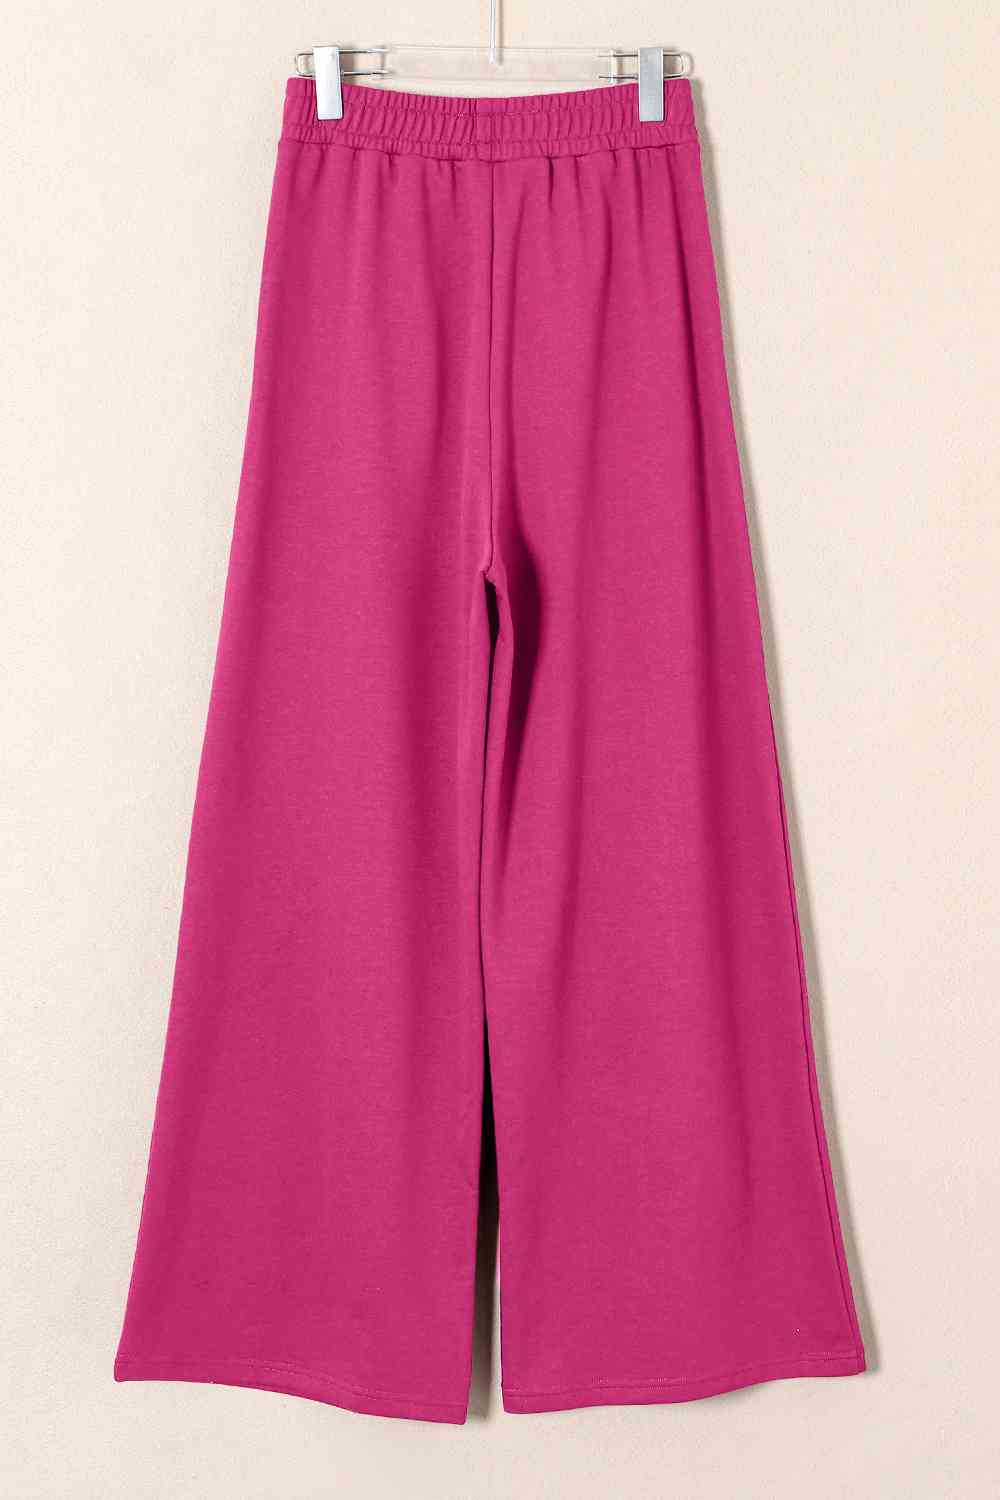 Maroon Lace-Up Wide Leg Pants with Pockets Sentient Beauty Fashions Apparel &amp; Accessories